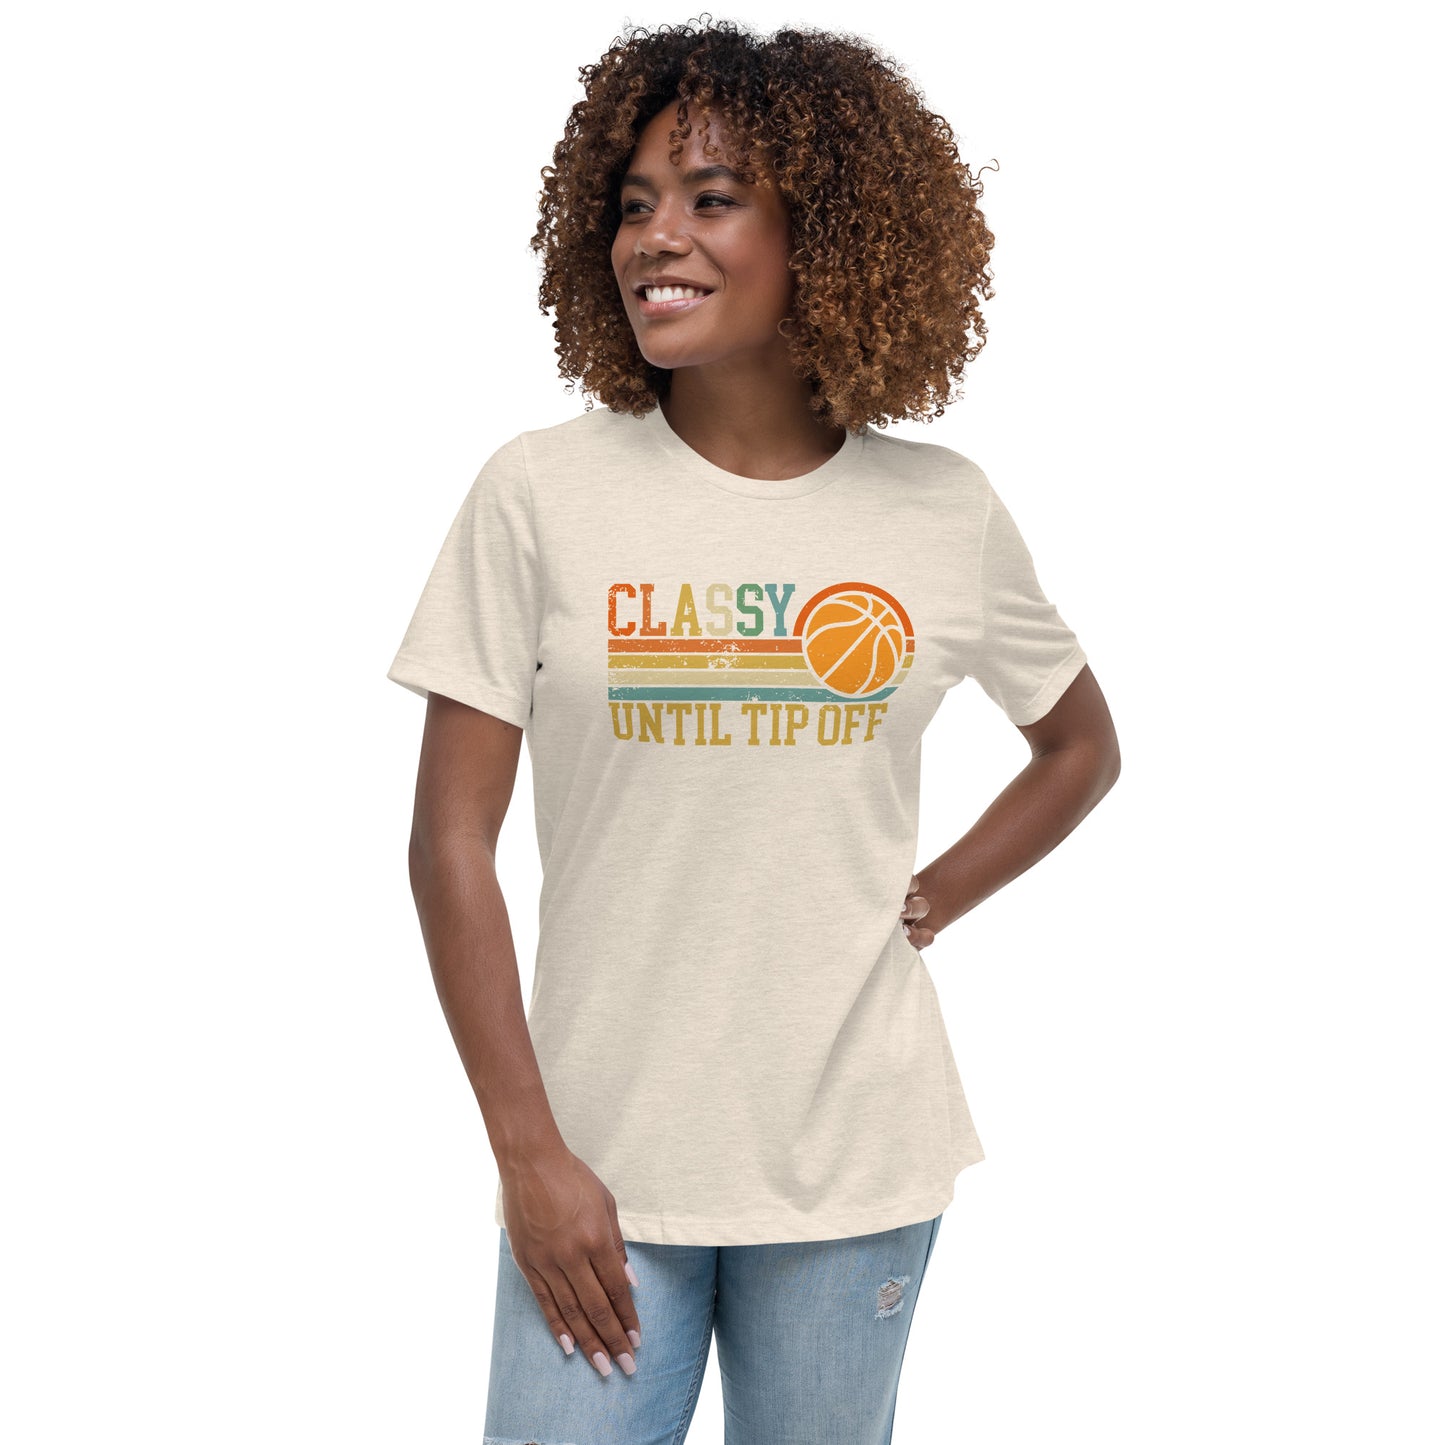 Classy Until Tip-off Women's Relaxed T-Shirt